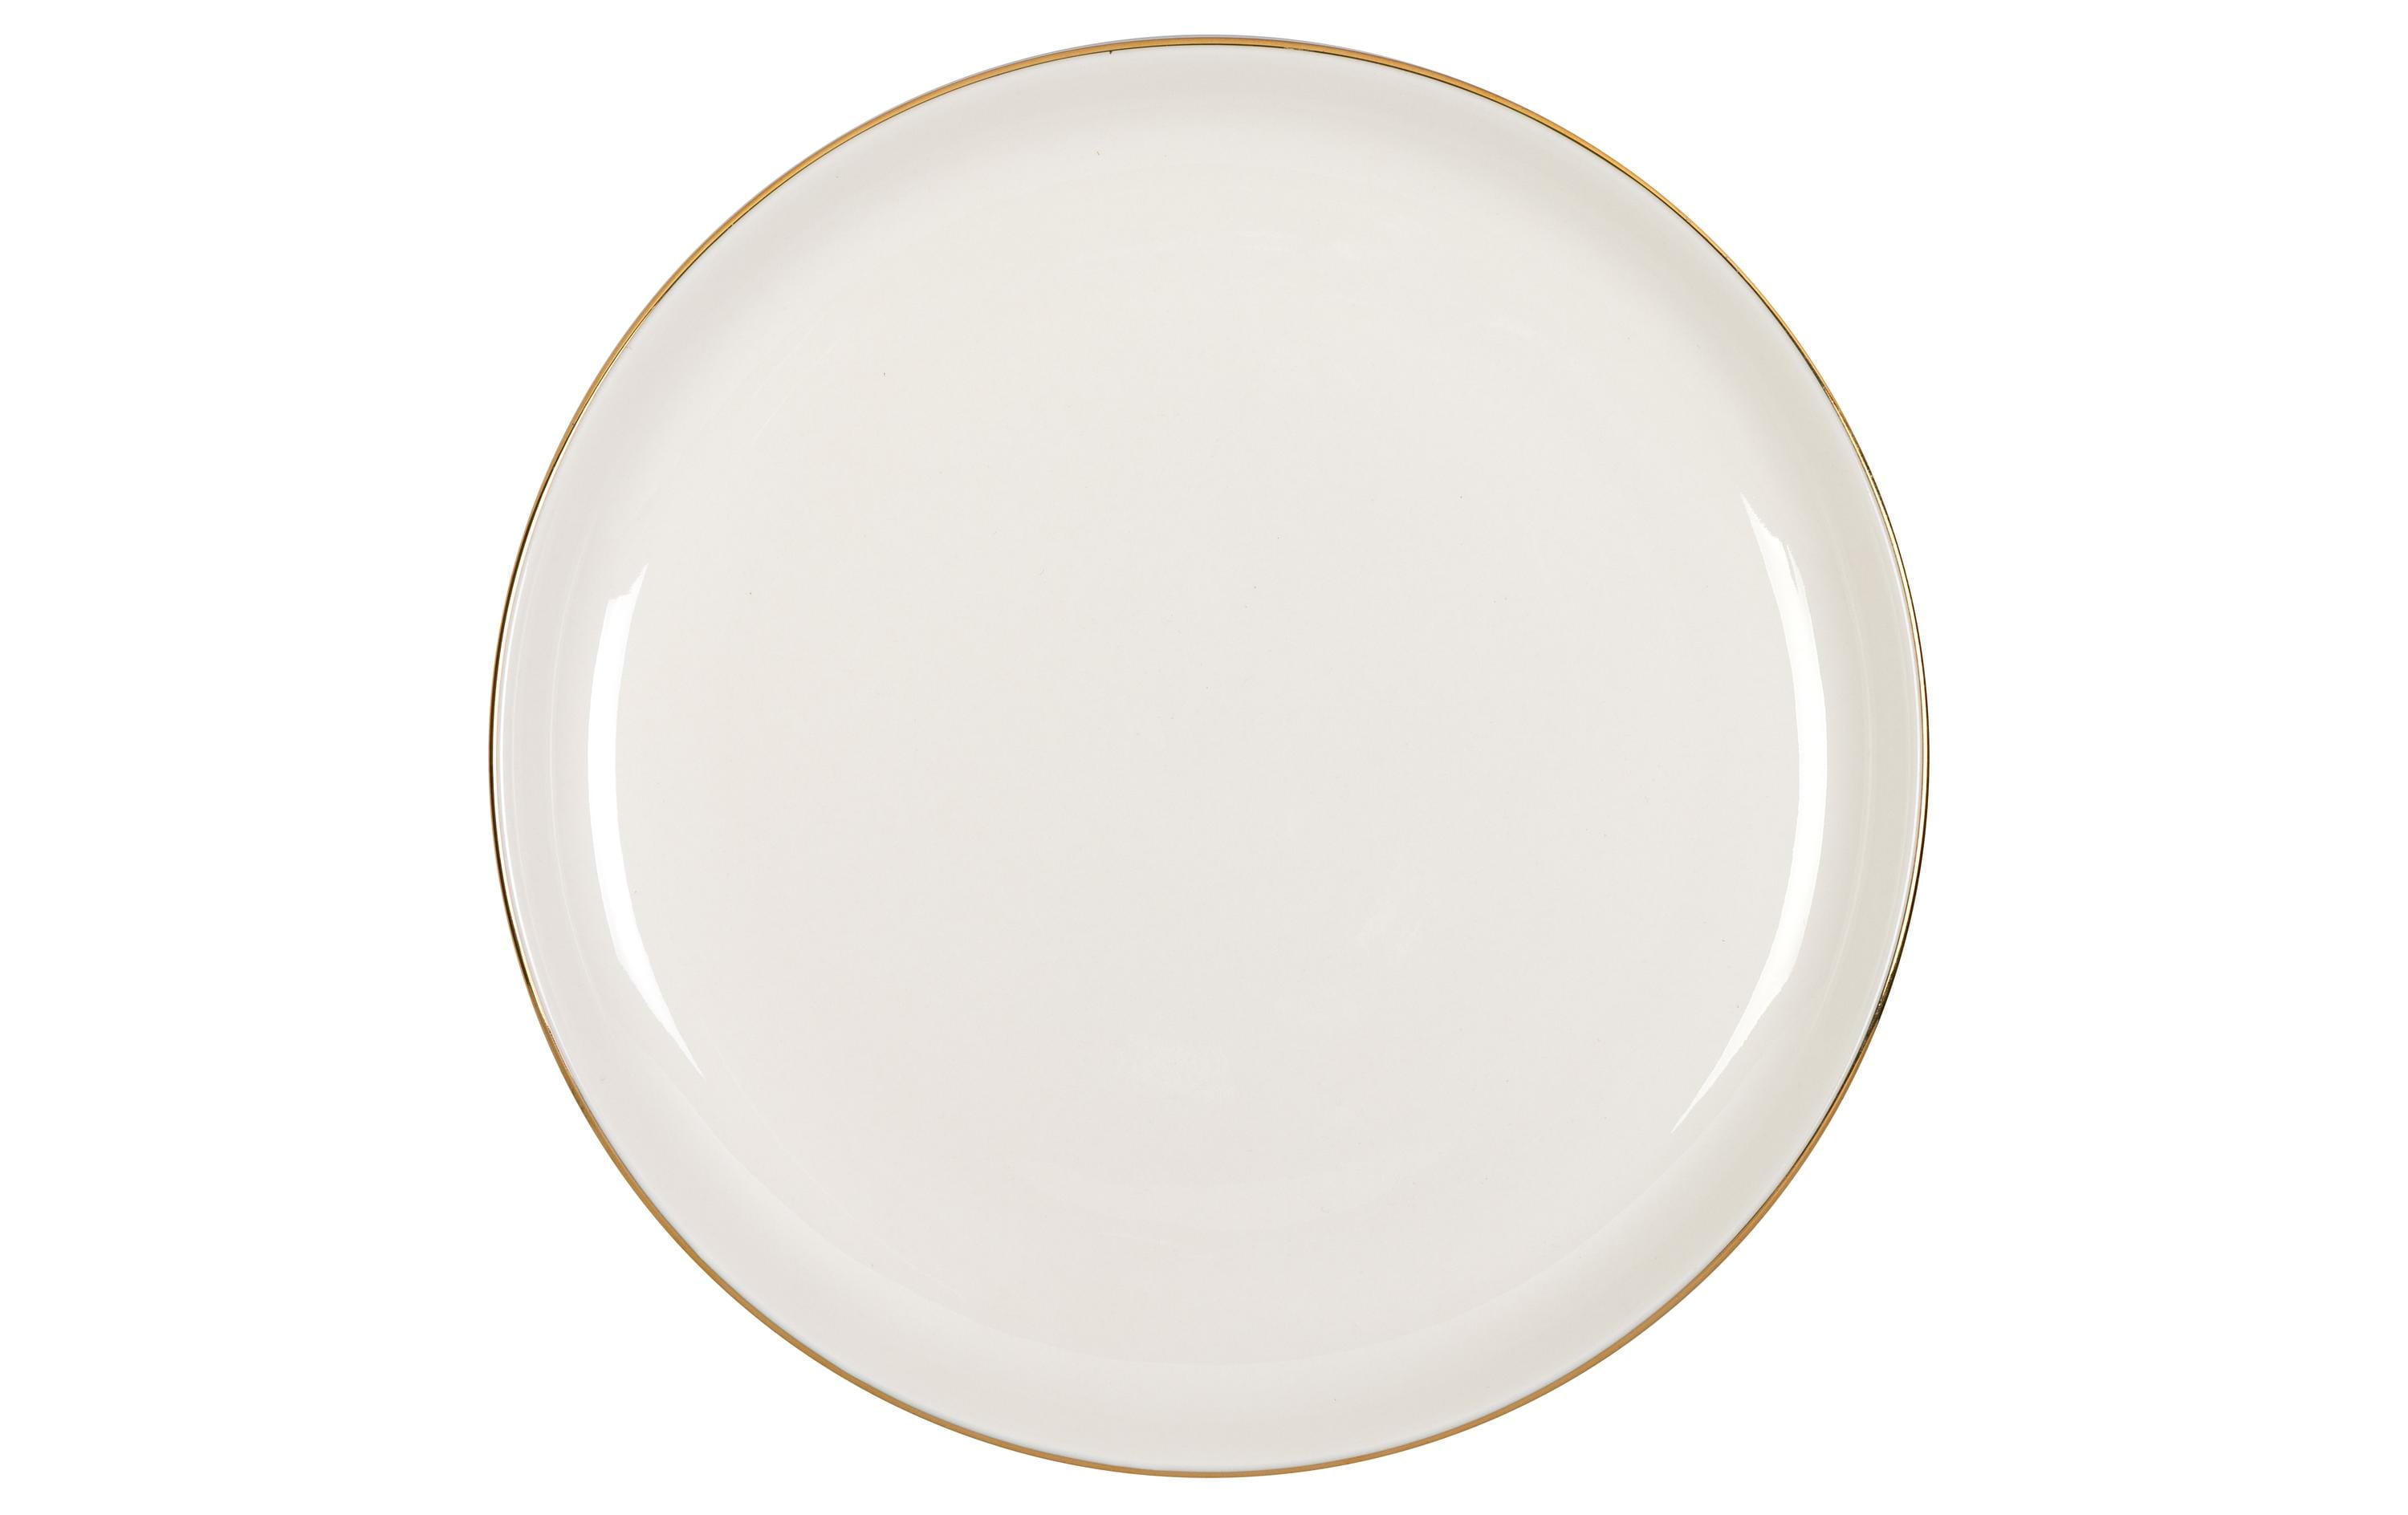 FURBER Speise-Service 20-teilig, Weiss/Gold